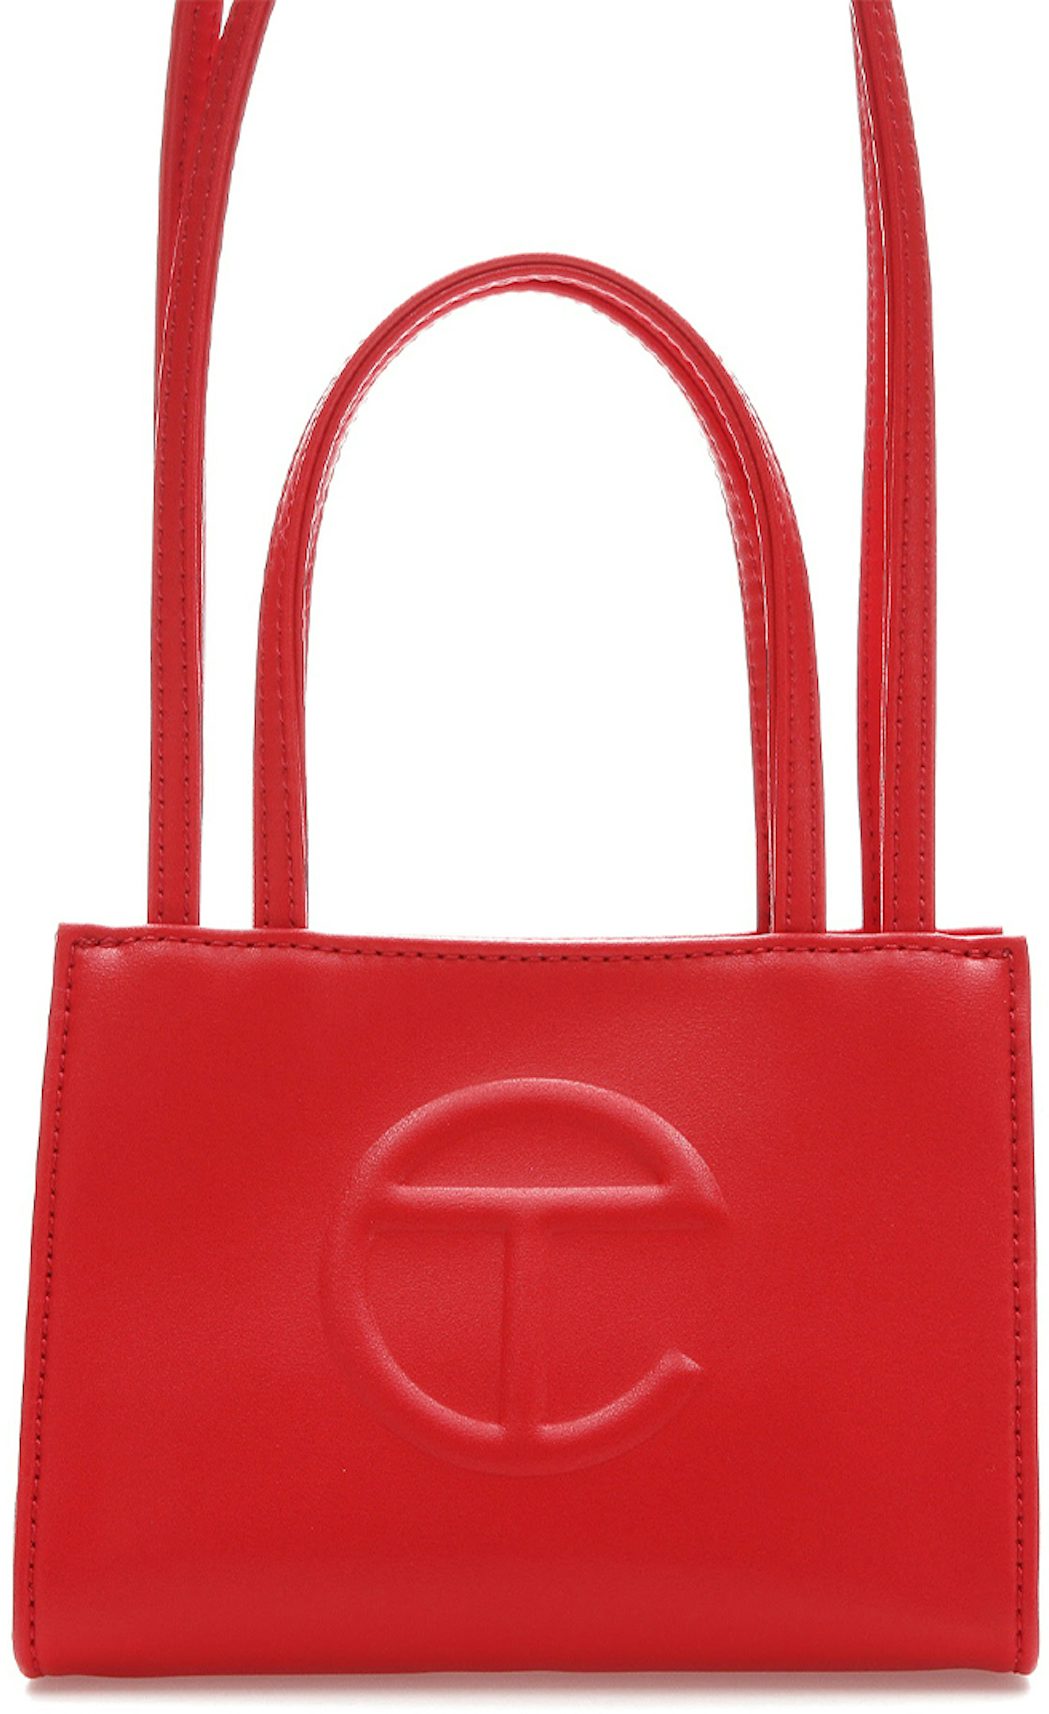 Buy Red Jelly Purse Red Jelly Bag Red Shoulder Bag Red Bag Online